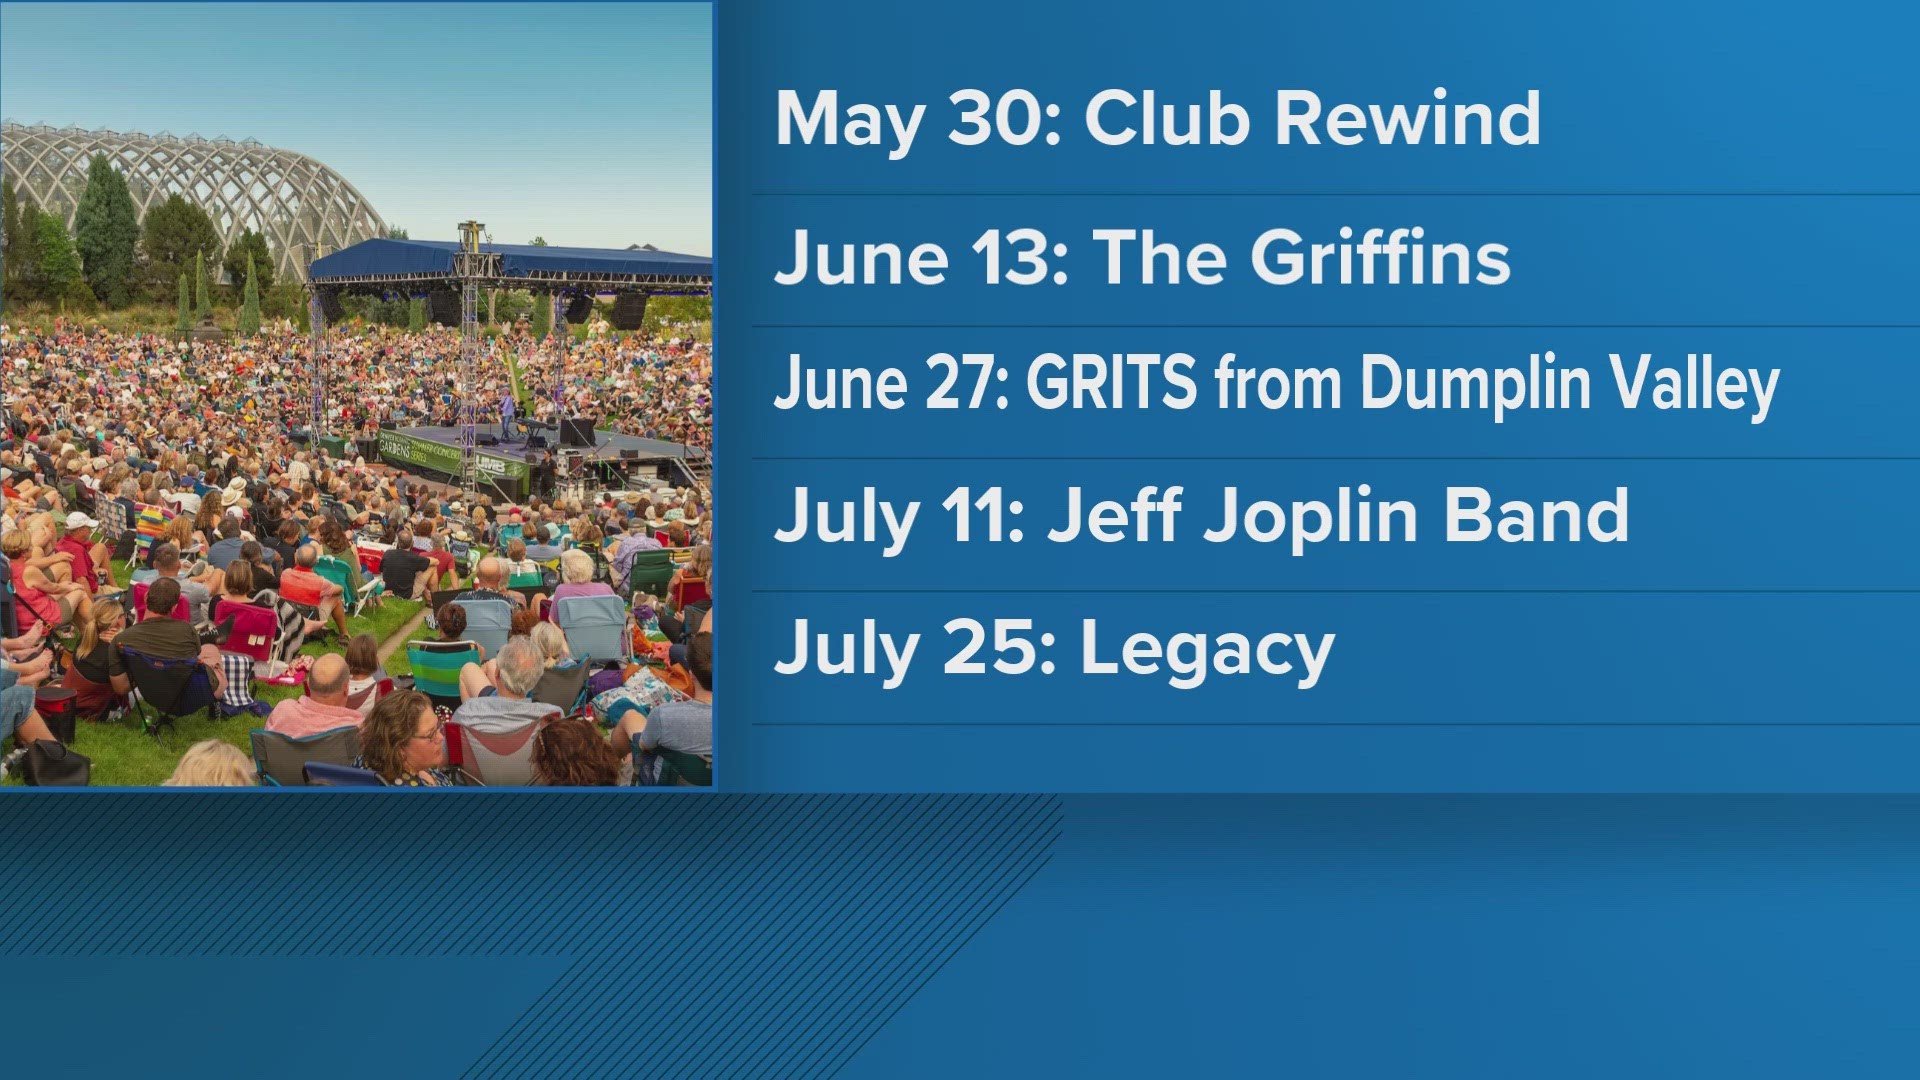 Some concerts to look forward to this summer include The Griffins, Jeff Joplin band, Legacy and more.